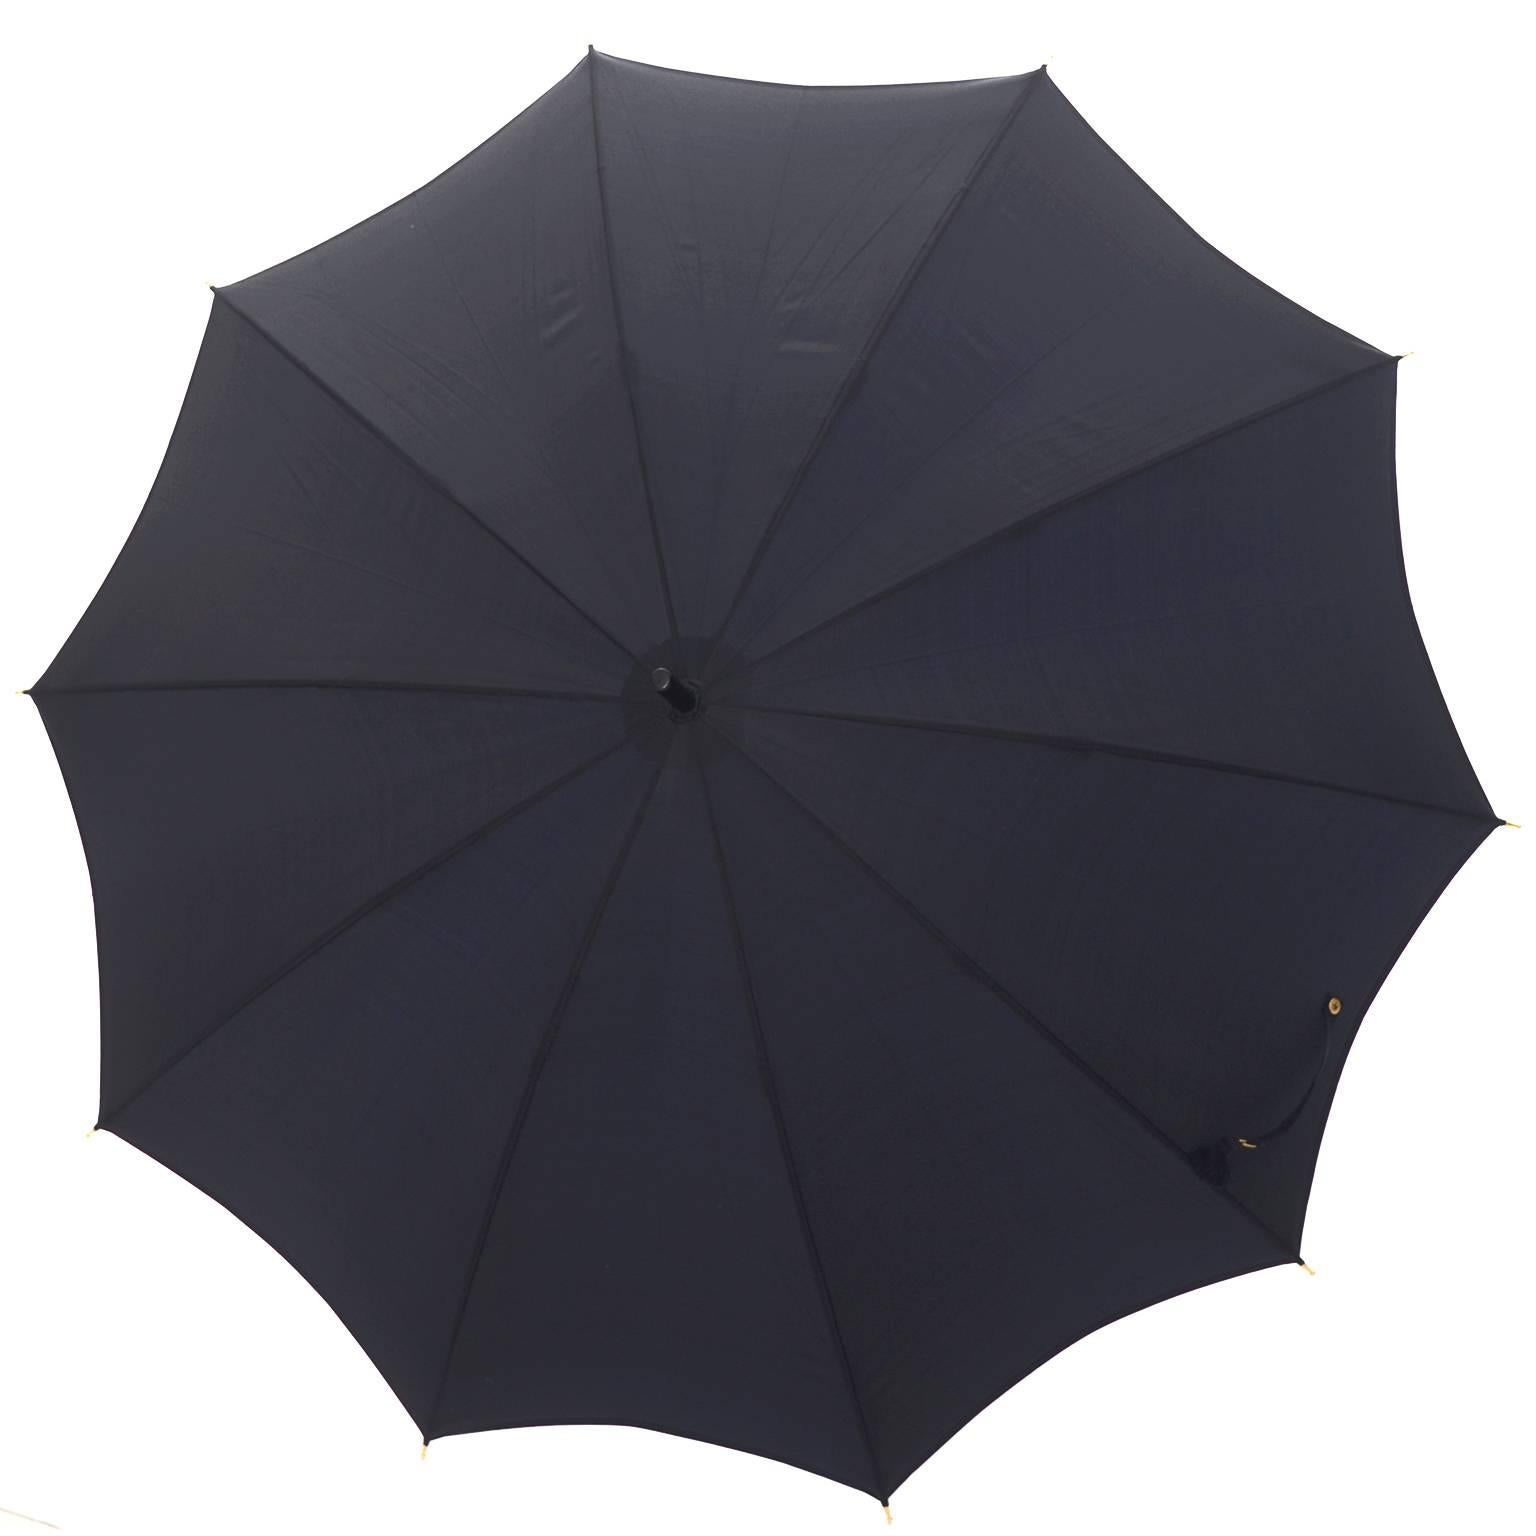 This is a black, classic, timeless Gucci vintage umbrella that is in as new condition with its original fabric sleeve.  The umbrella has the white and gold Gucci label inside, and it measures 33 inches wide and 27 inches from the top of the umbrella